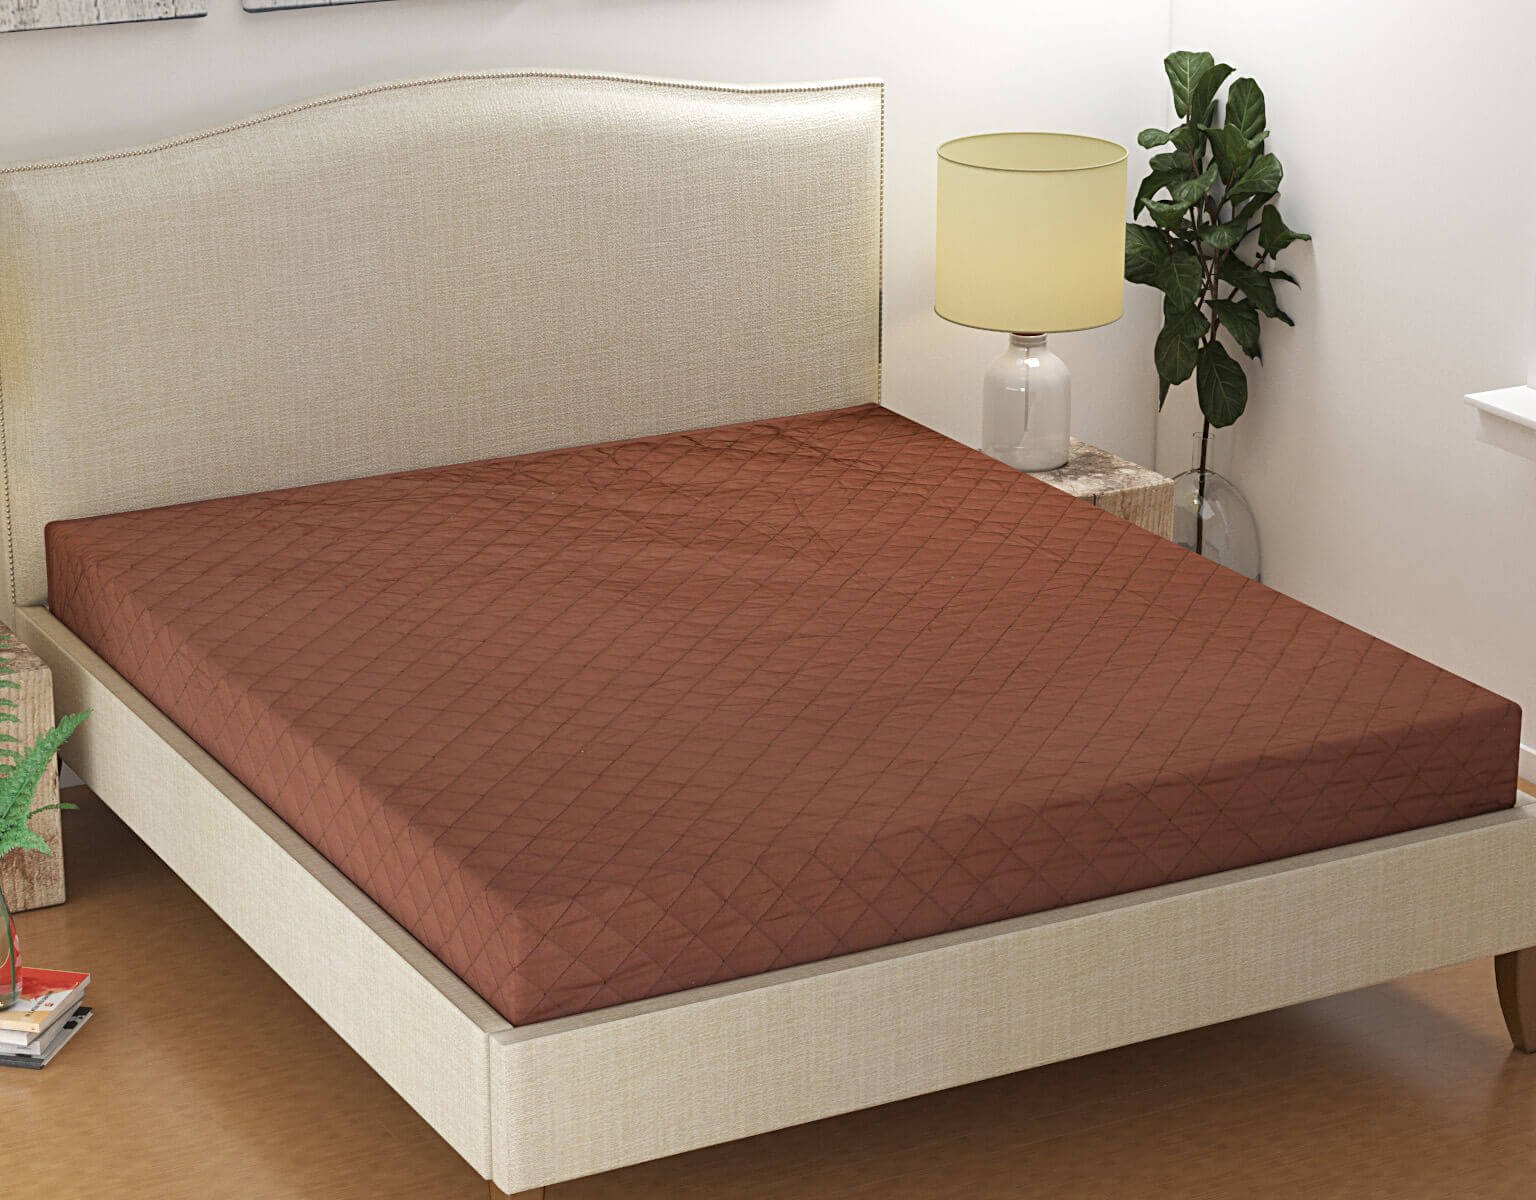 Buy waterproof fitted mattress protector